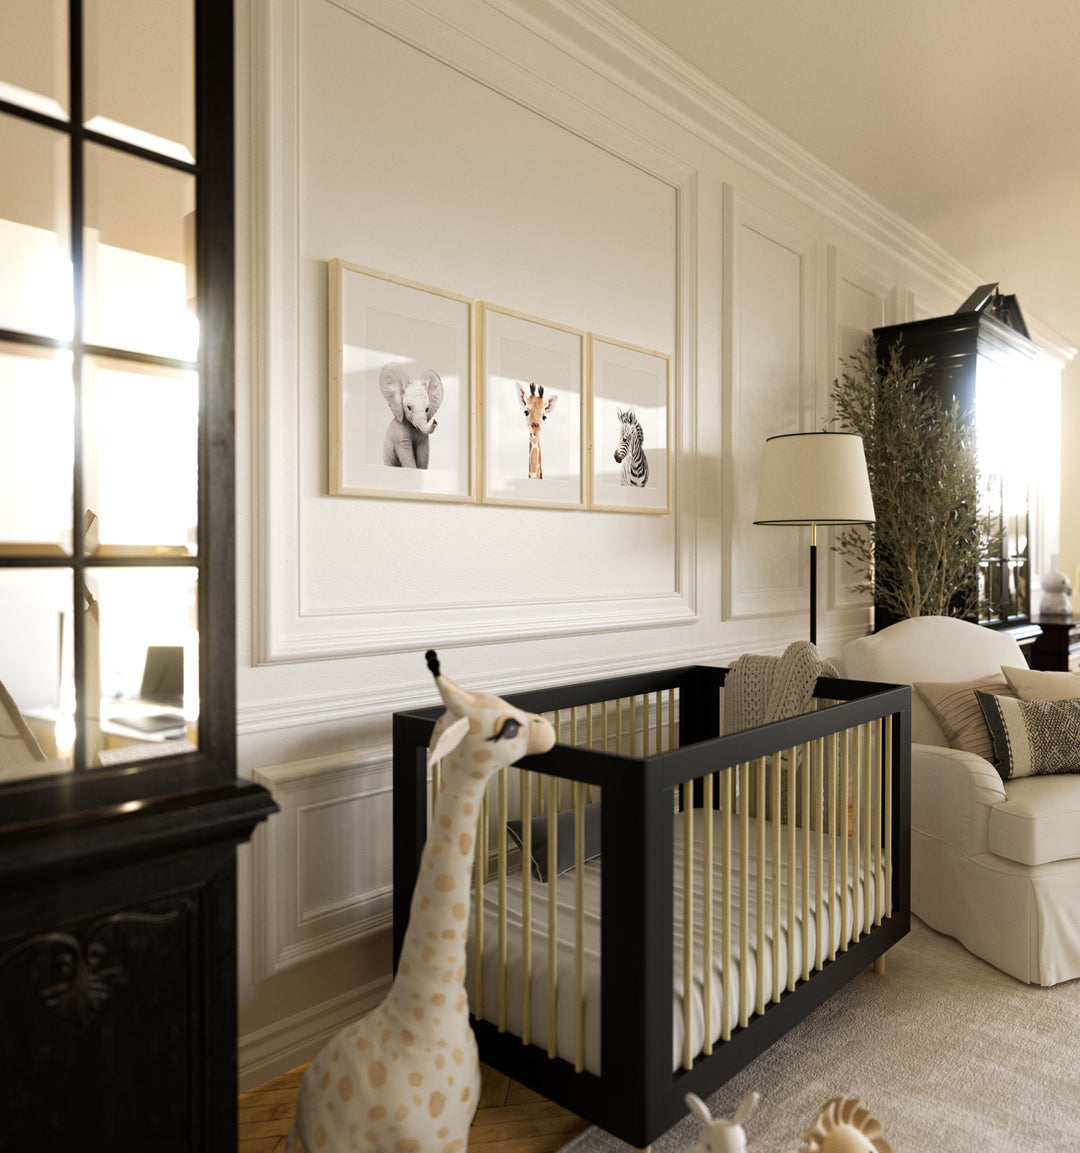 Check out these 20 nursery design tips BEFORE you begin decorating your baby's room